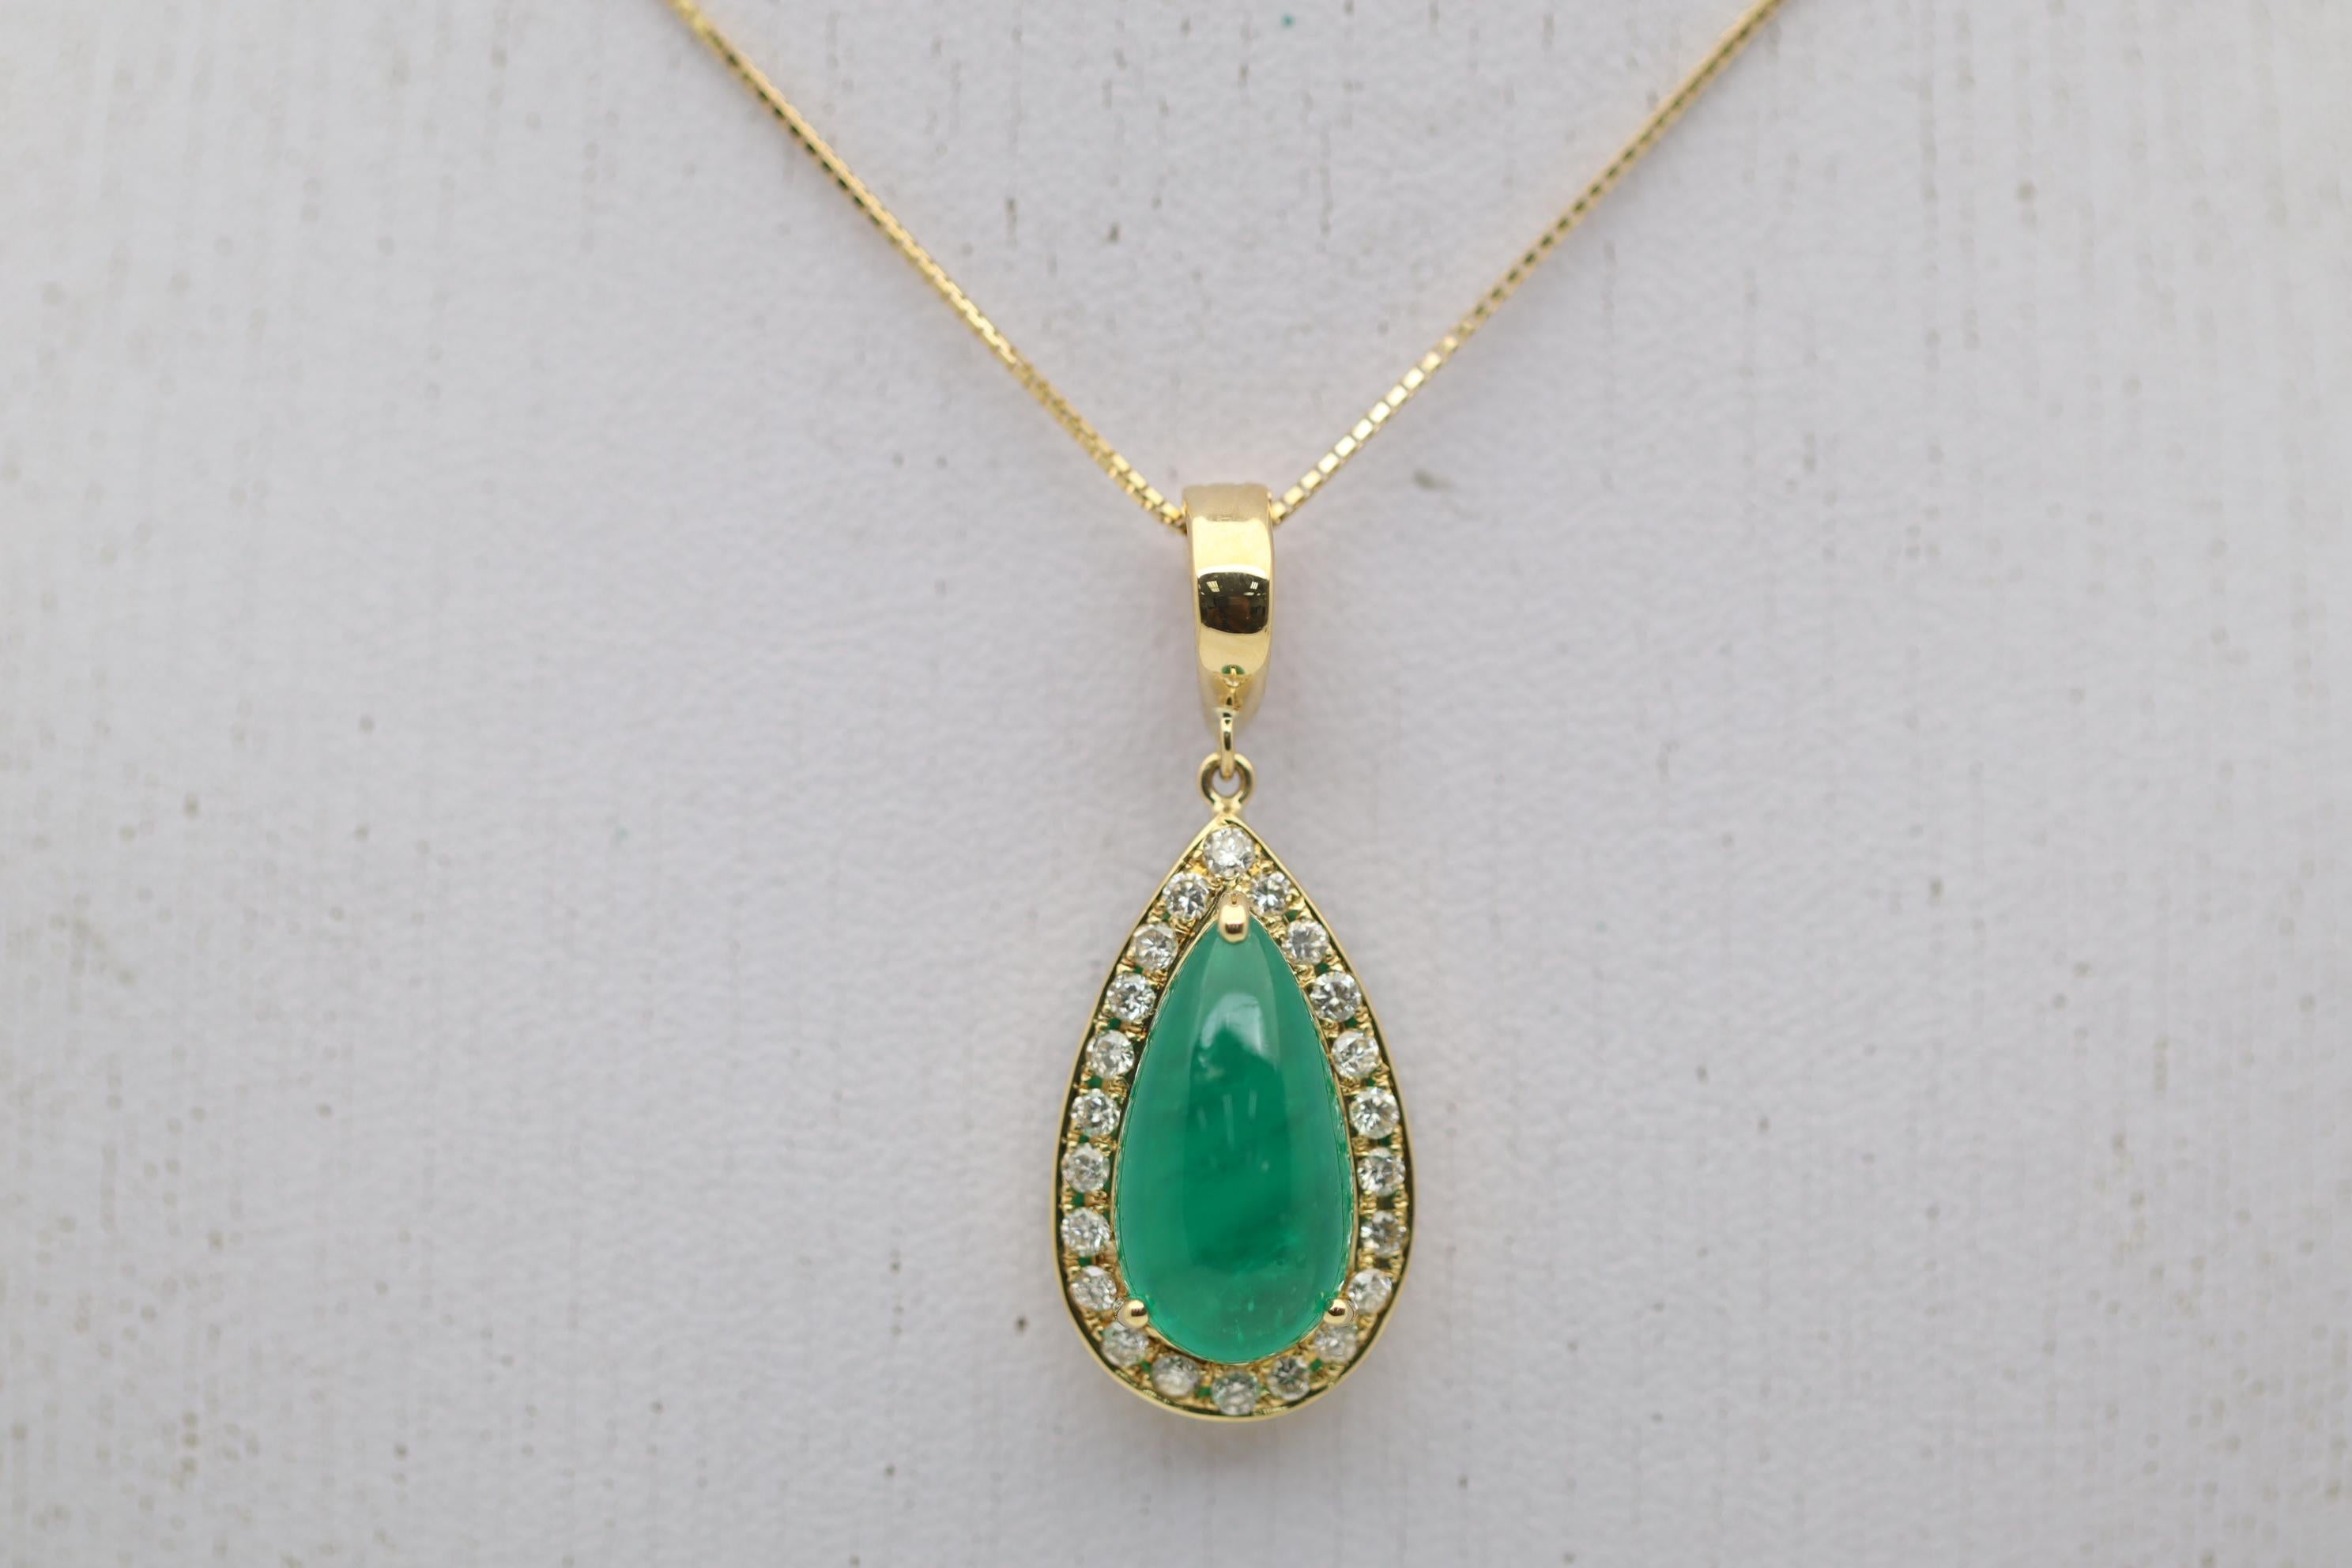 A lovely gold pendant featuring a 5.04 carat emerald. The emerald has a rich deep green color and is shaped into a drop-shaped cabochon. It is complemented by 0.44 carats of round brilliant-cut diamonds set around the emerald and add brilliance and